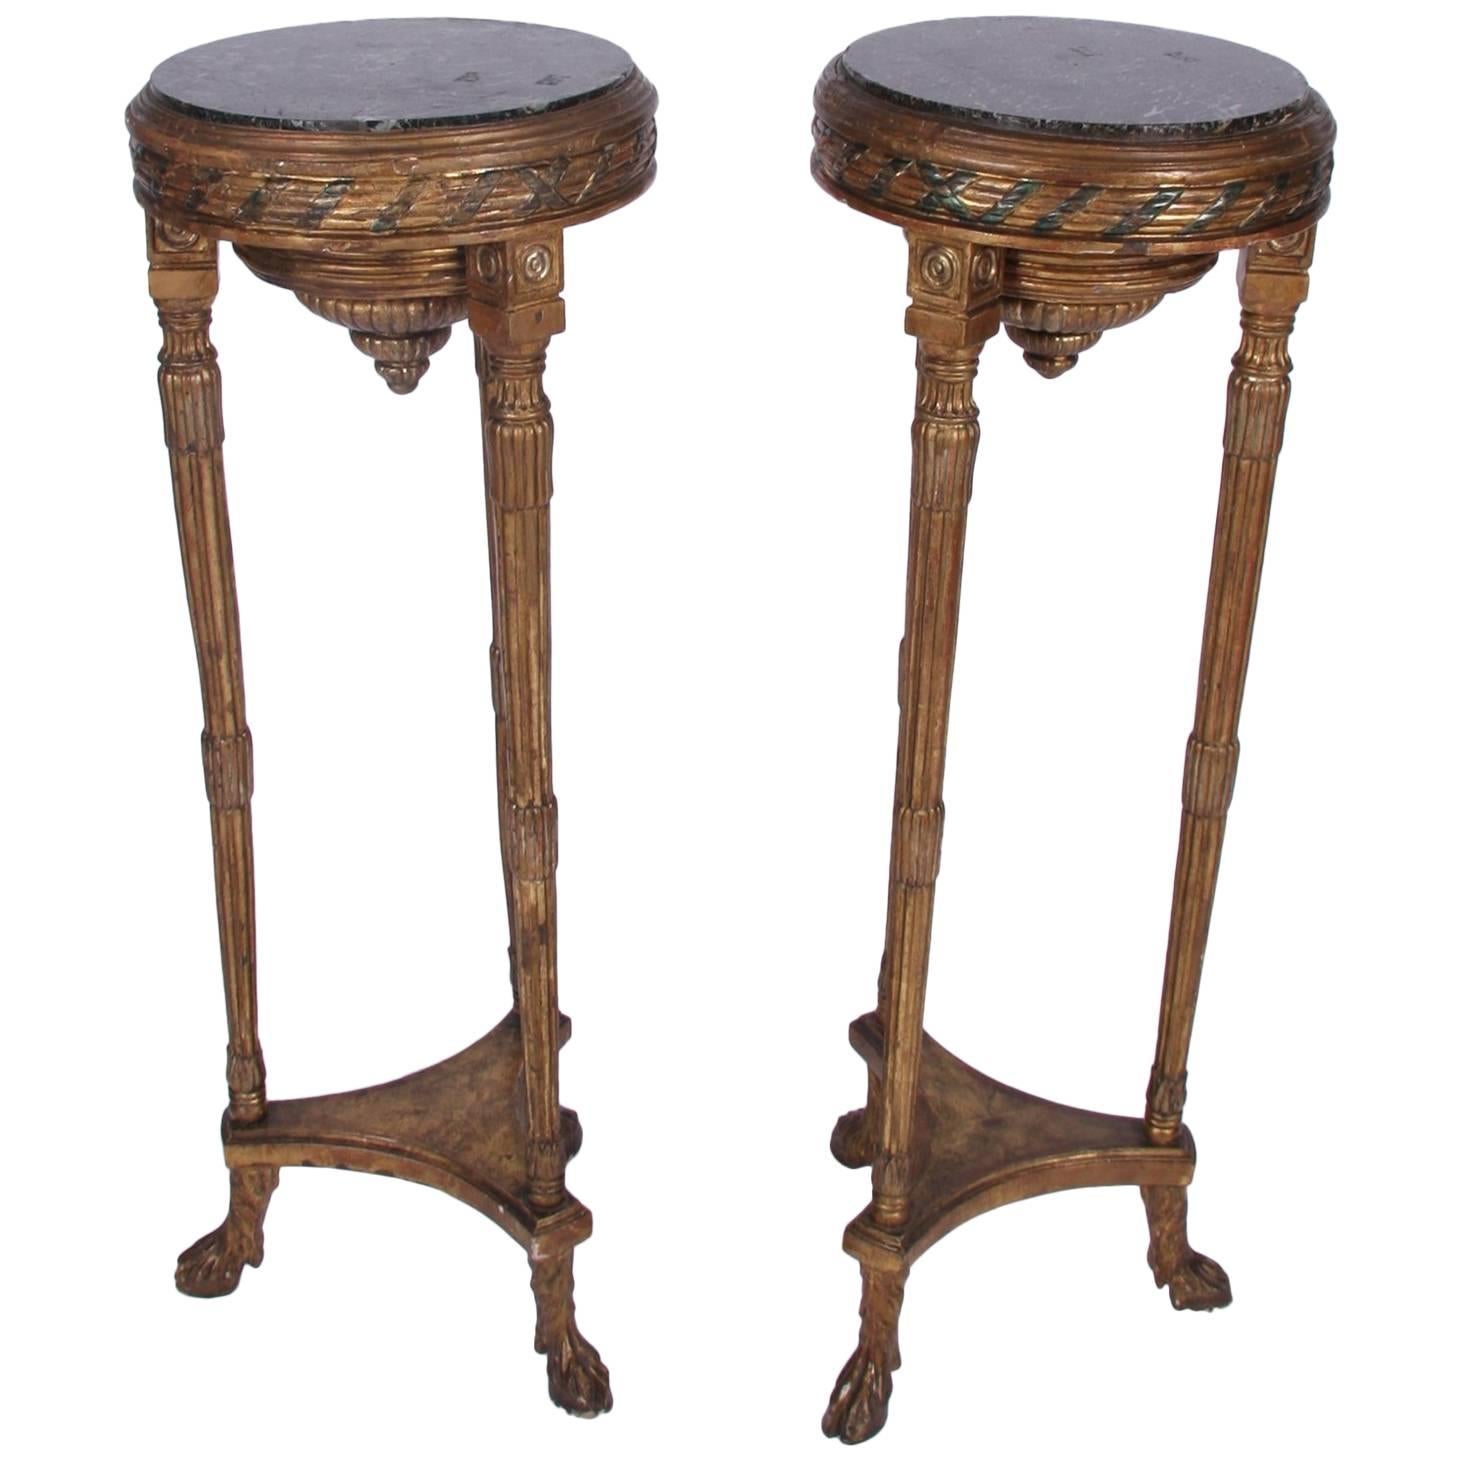 Pair of French Tall Giltwood Tables